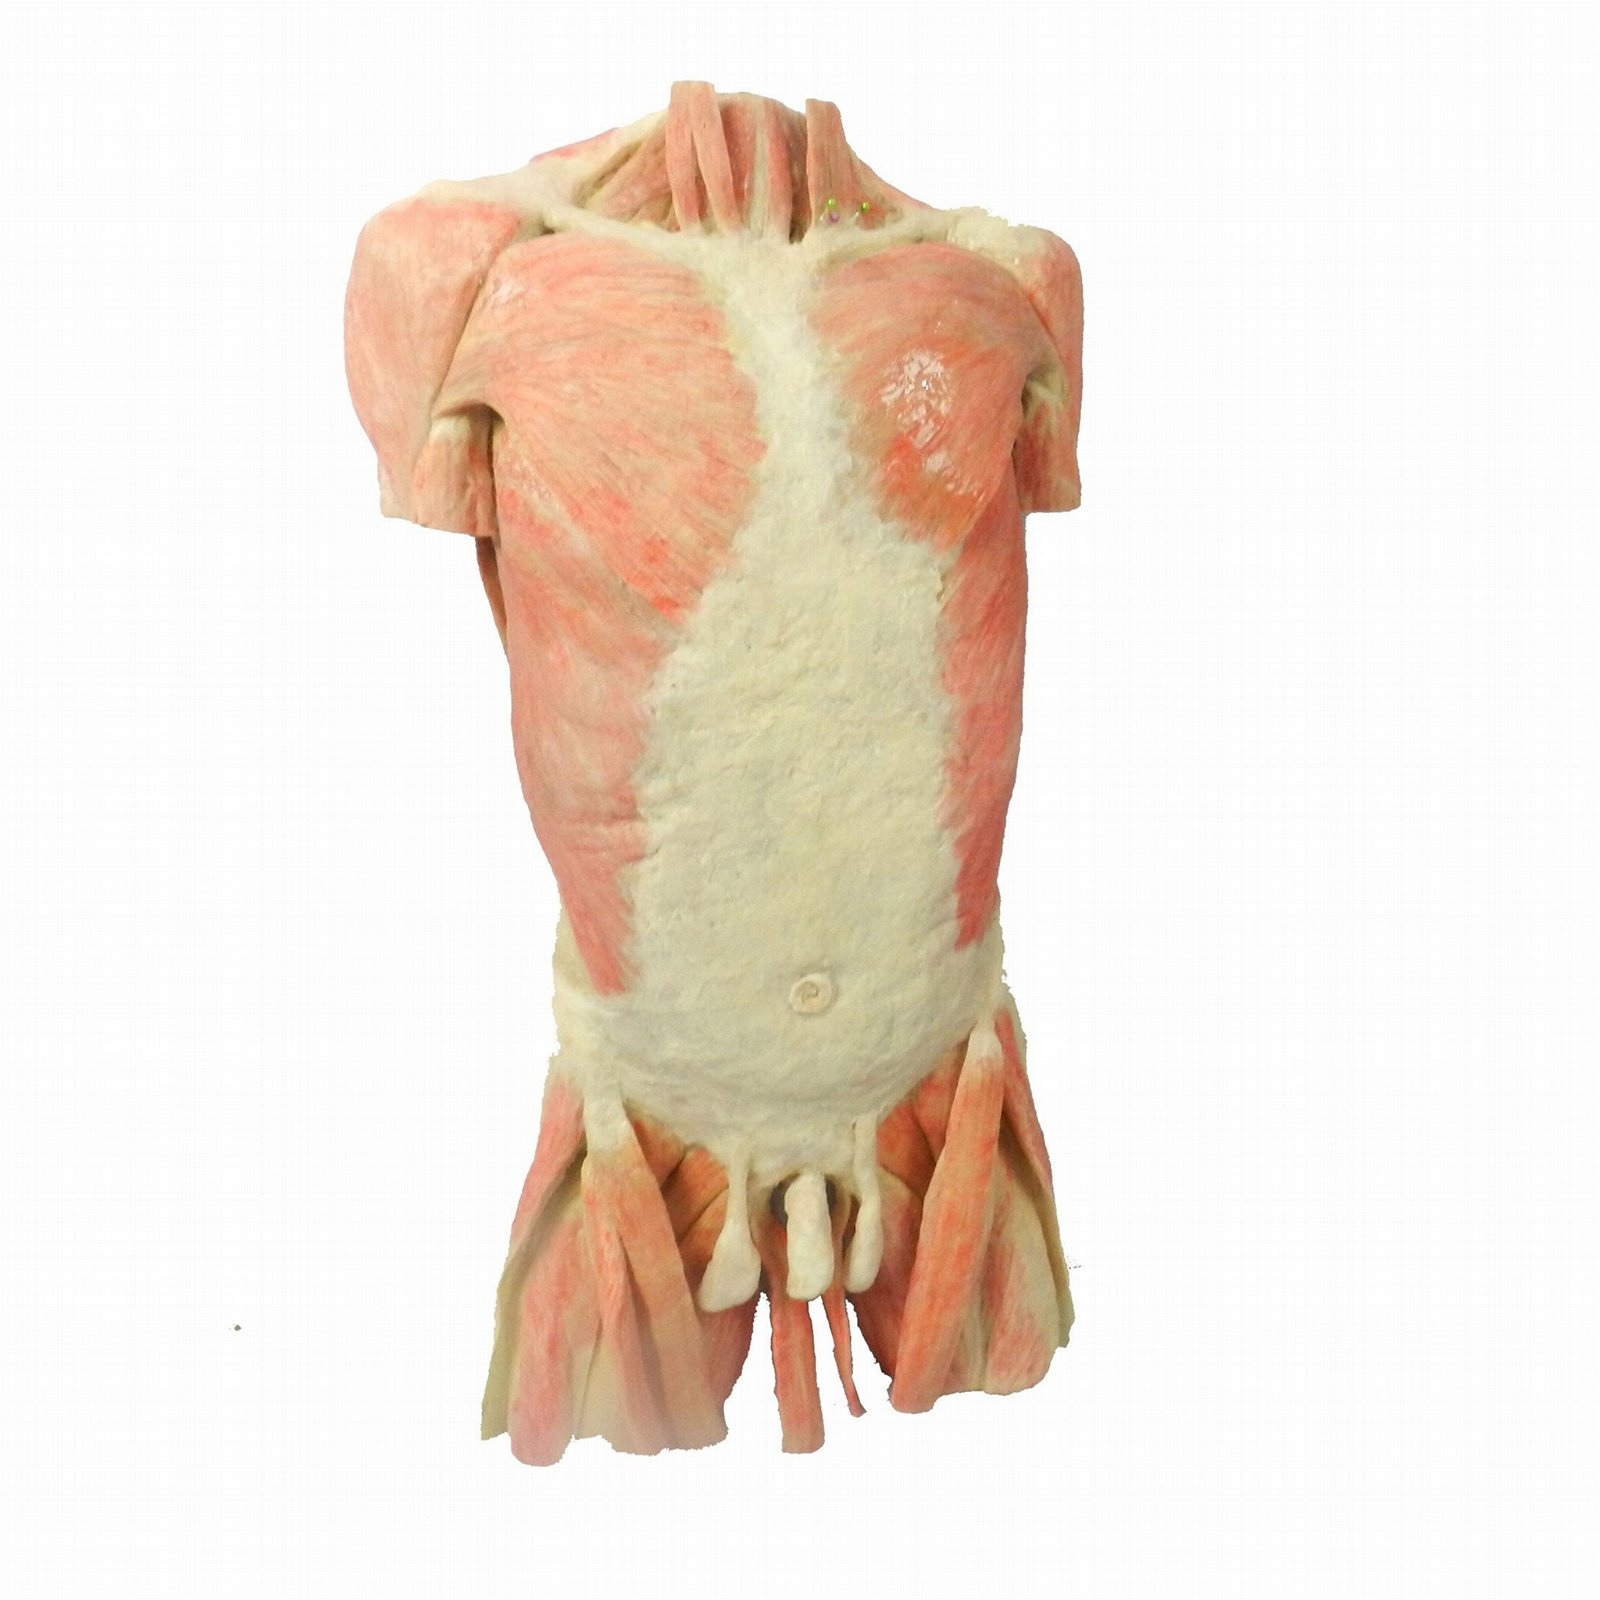 Muscles of Trunk Plastination Human Body for Teaching Anatomy